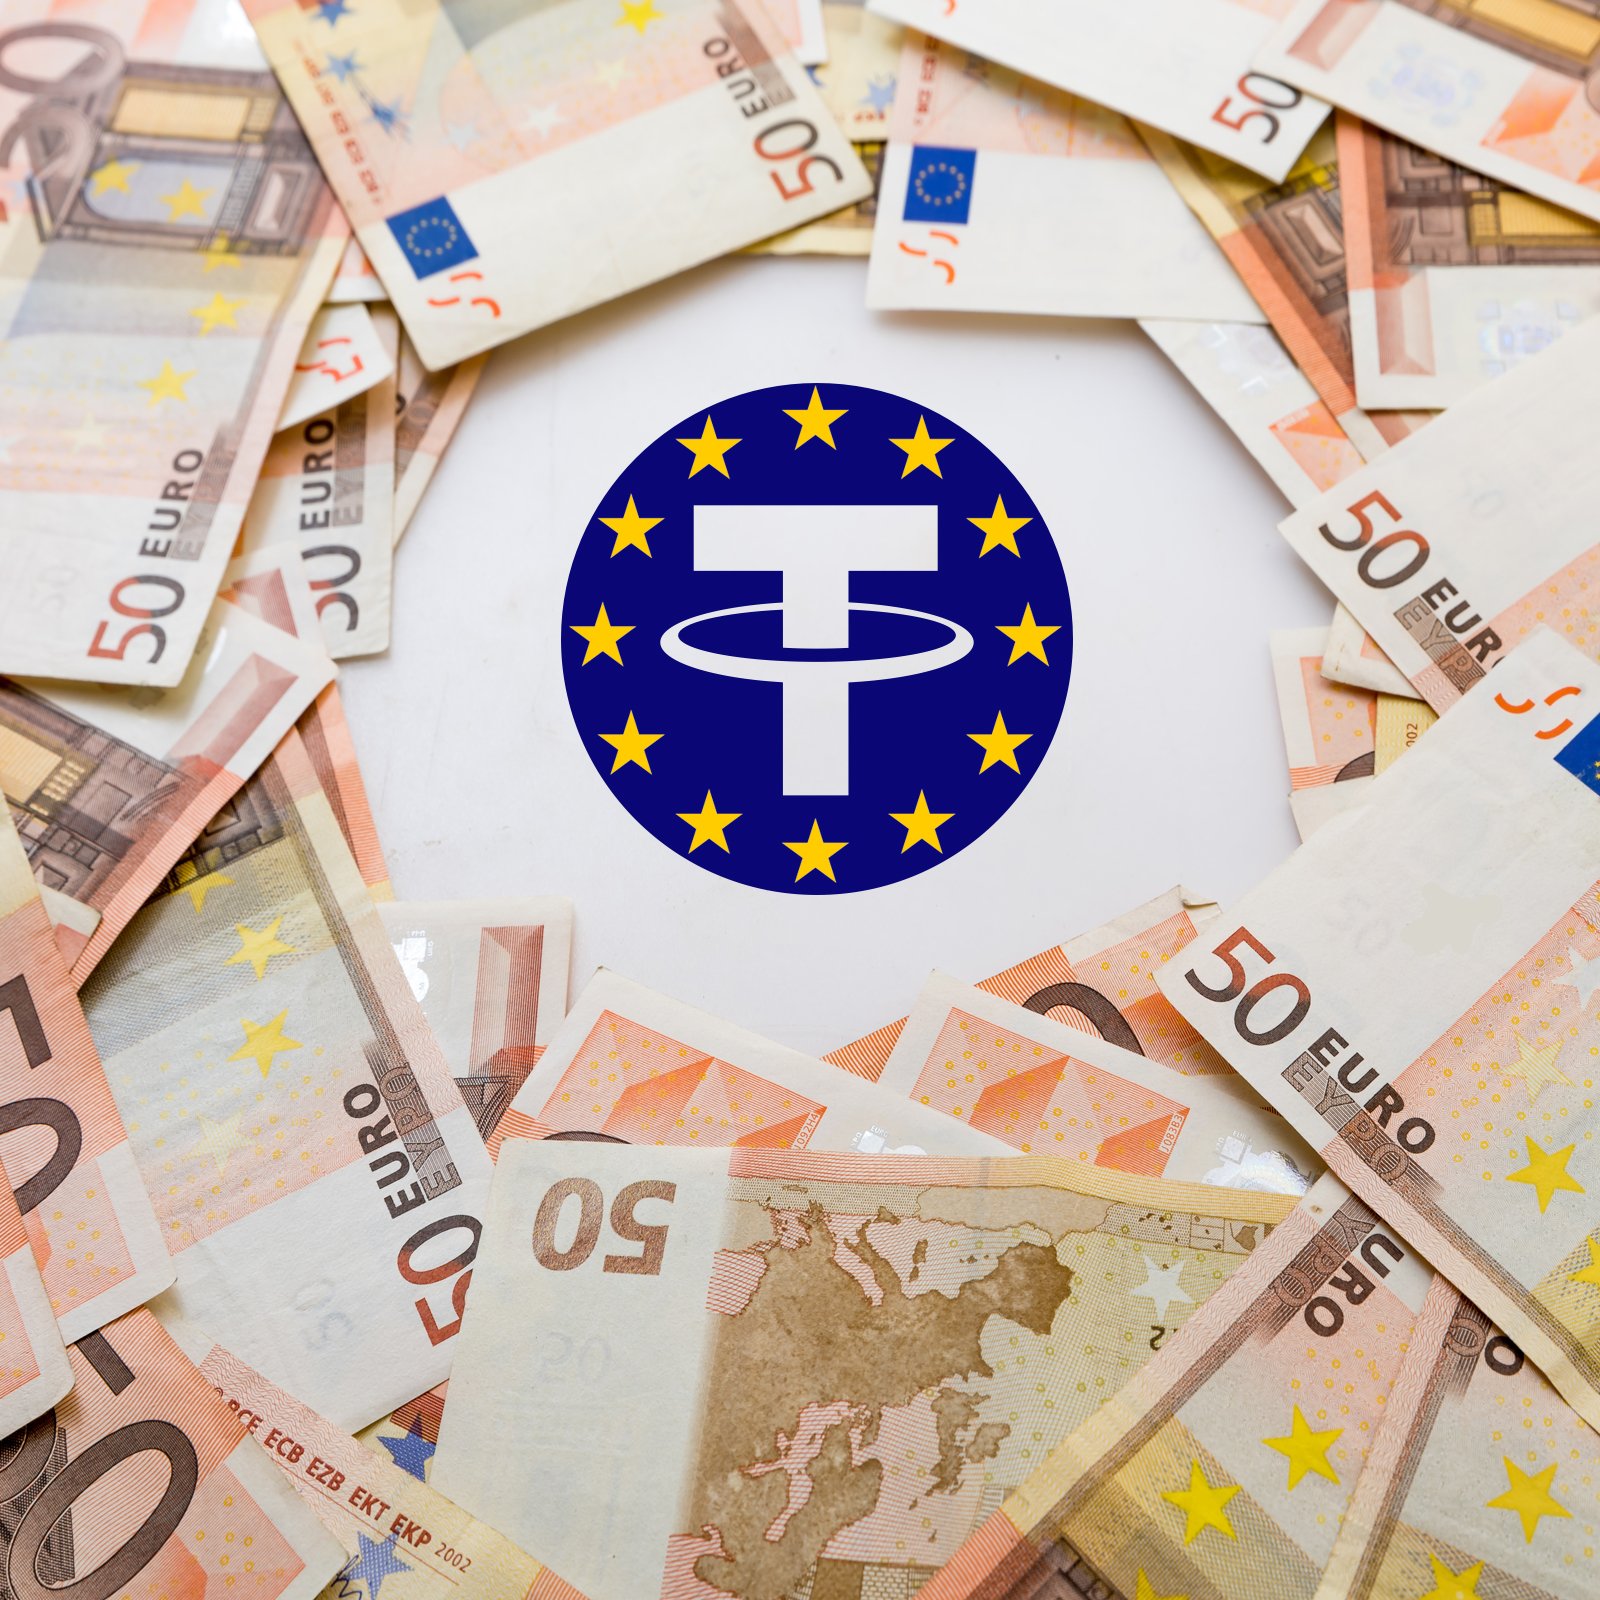 After Creating a Digital USD Tether Limited Creates EURTs